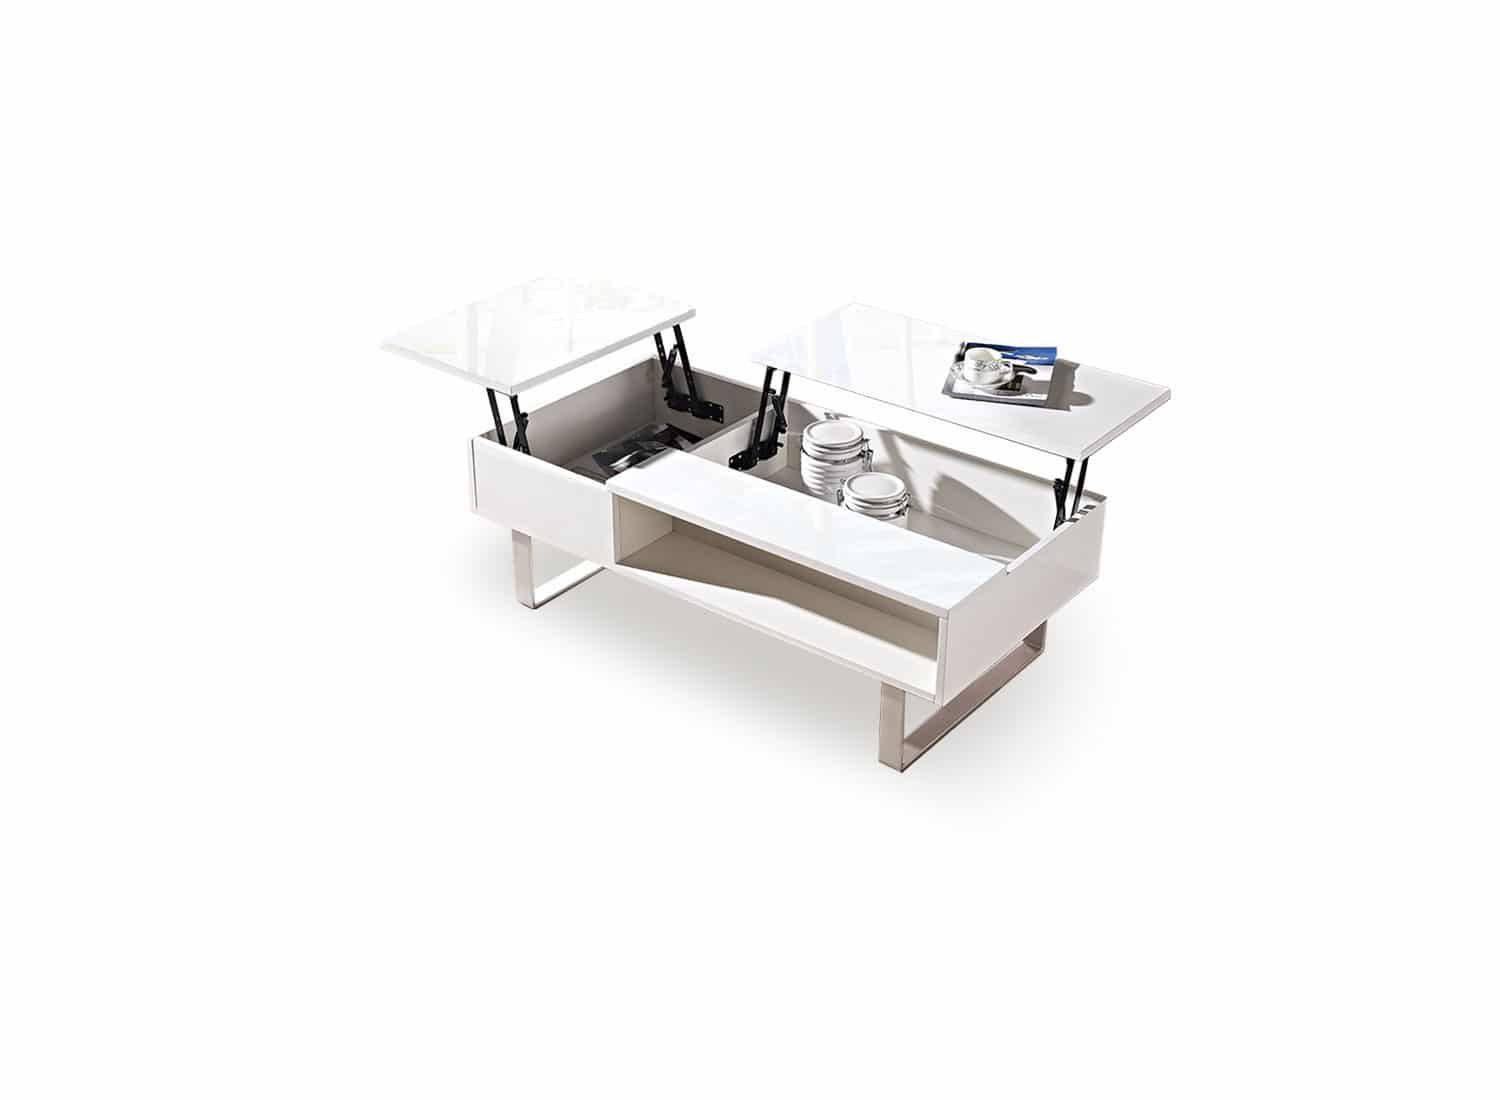 Occam Coffee Table With Lift Top | Expand Furniture With Lift Top Storage Coffee Tables (View 7 of 15)